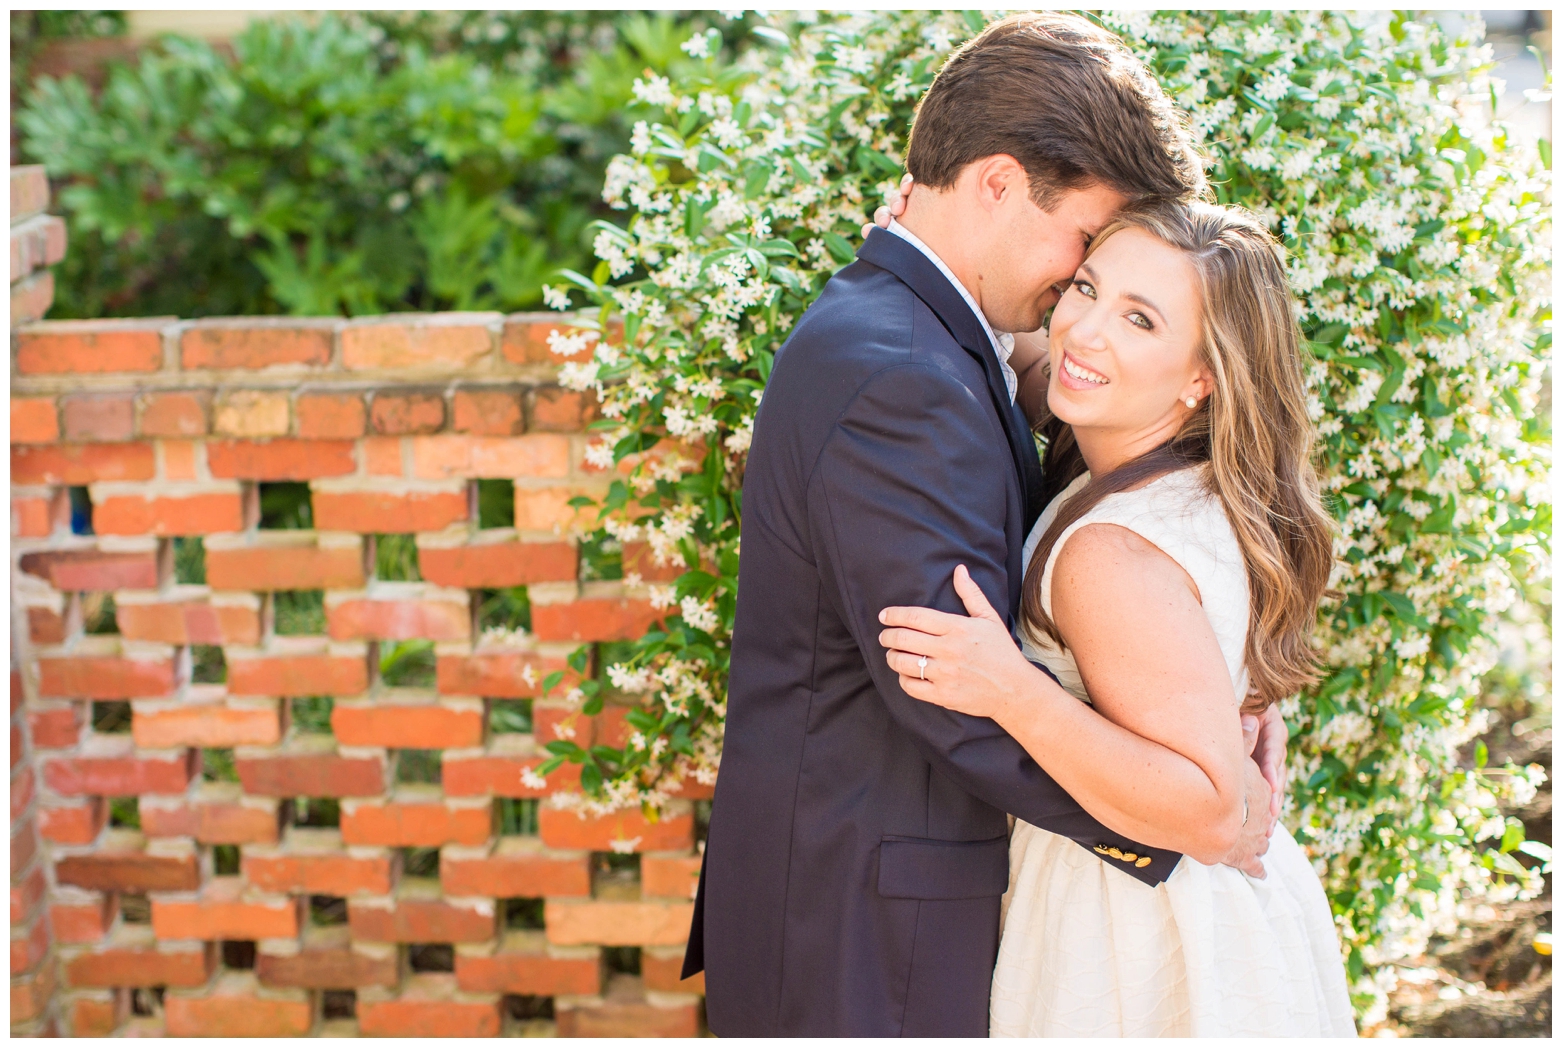 View More: http://hopetaylorphotographyphotos.pass.us/kelley-and-perry-engagement